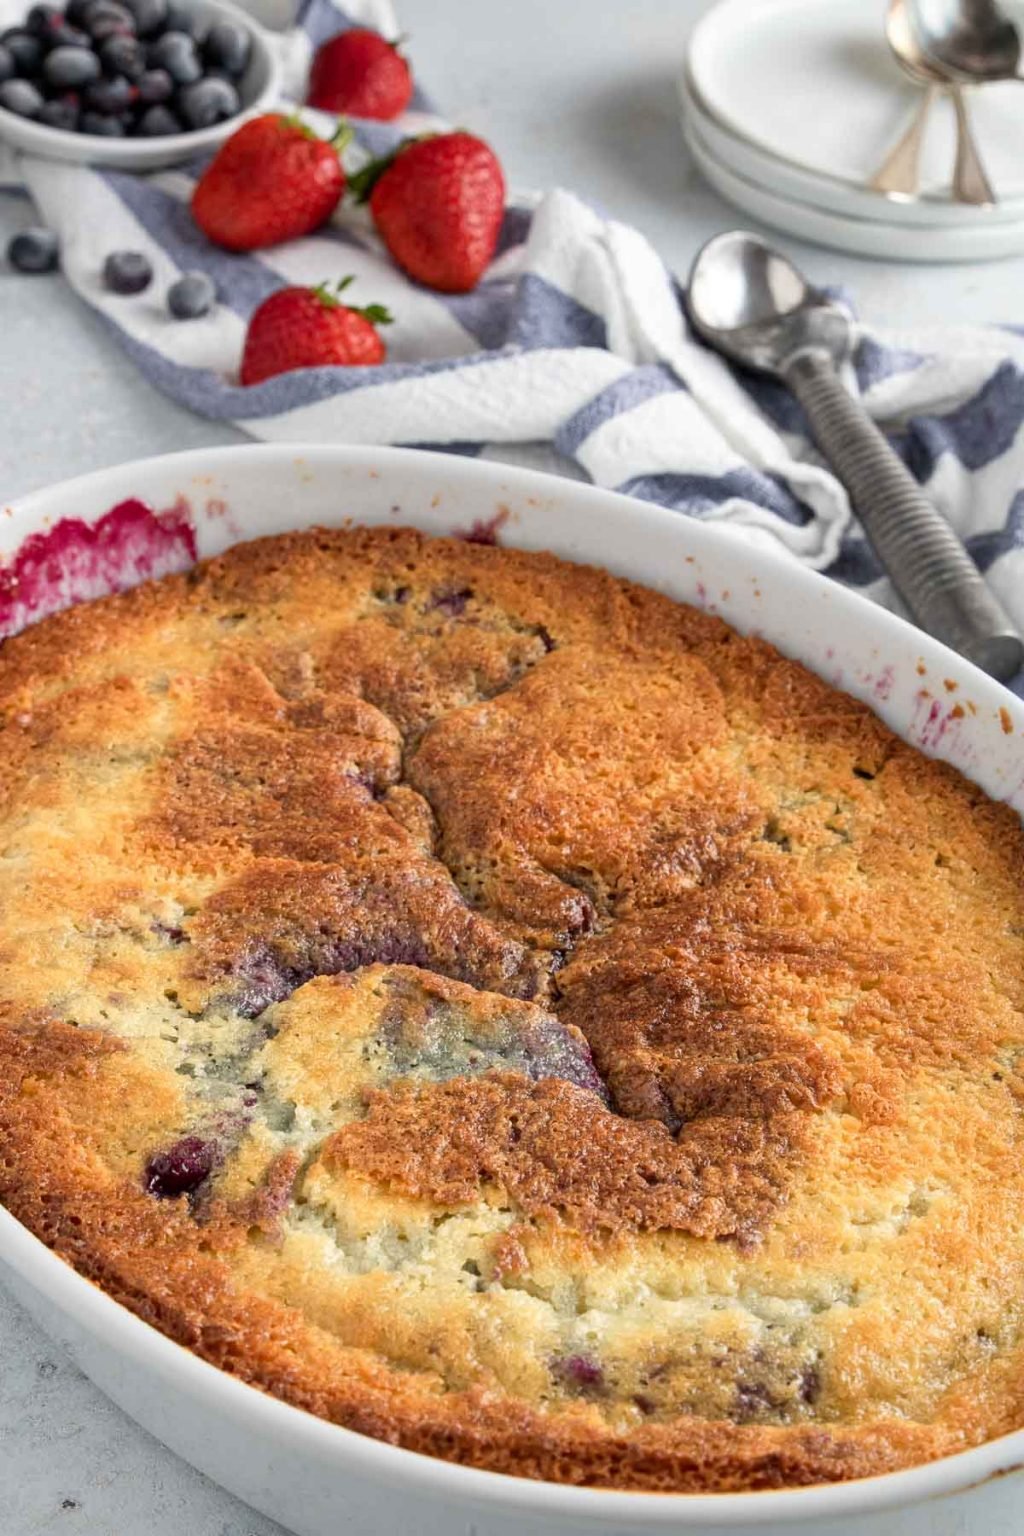 Berry Cobbler baked with the vanilla cake on top